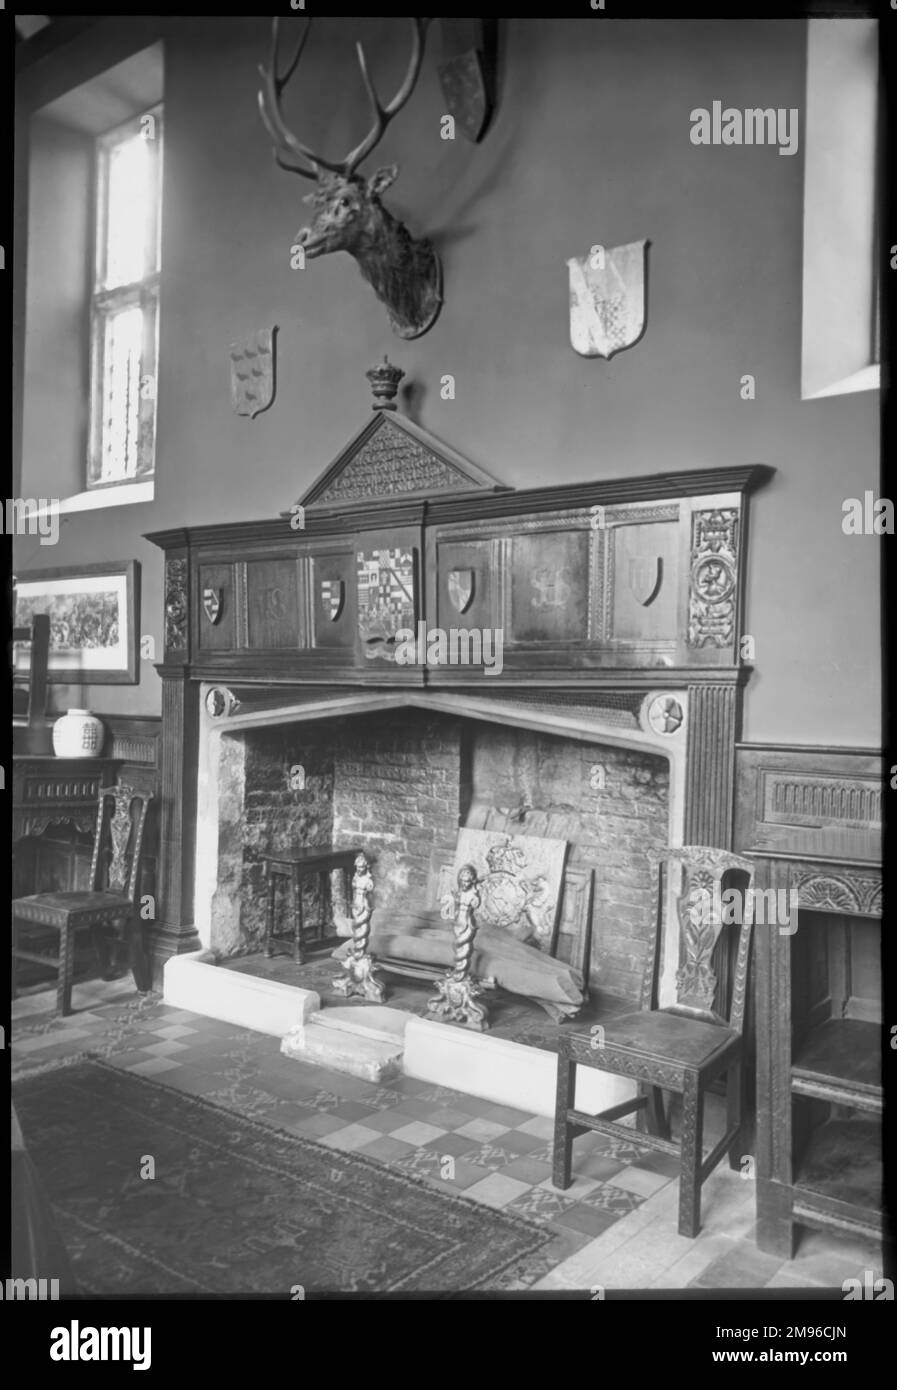 Interior view of the hall of Sackville College, East Grinstead, West Sussex, a Jacobean almshouse founded in 1609 to provide sheltered accommodation for the elderly.  Seen here is a large brick fireplace and grate, with a wooden chair on either side, and a stag's head with antlers above. Stock Photo